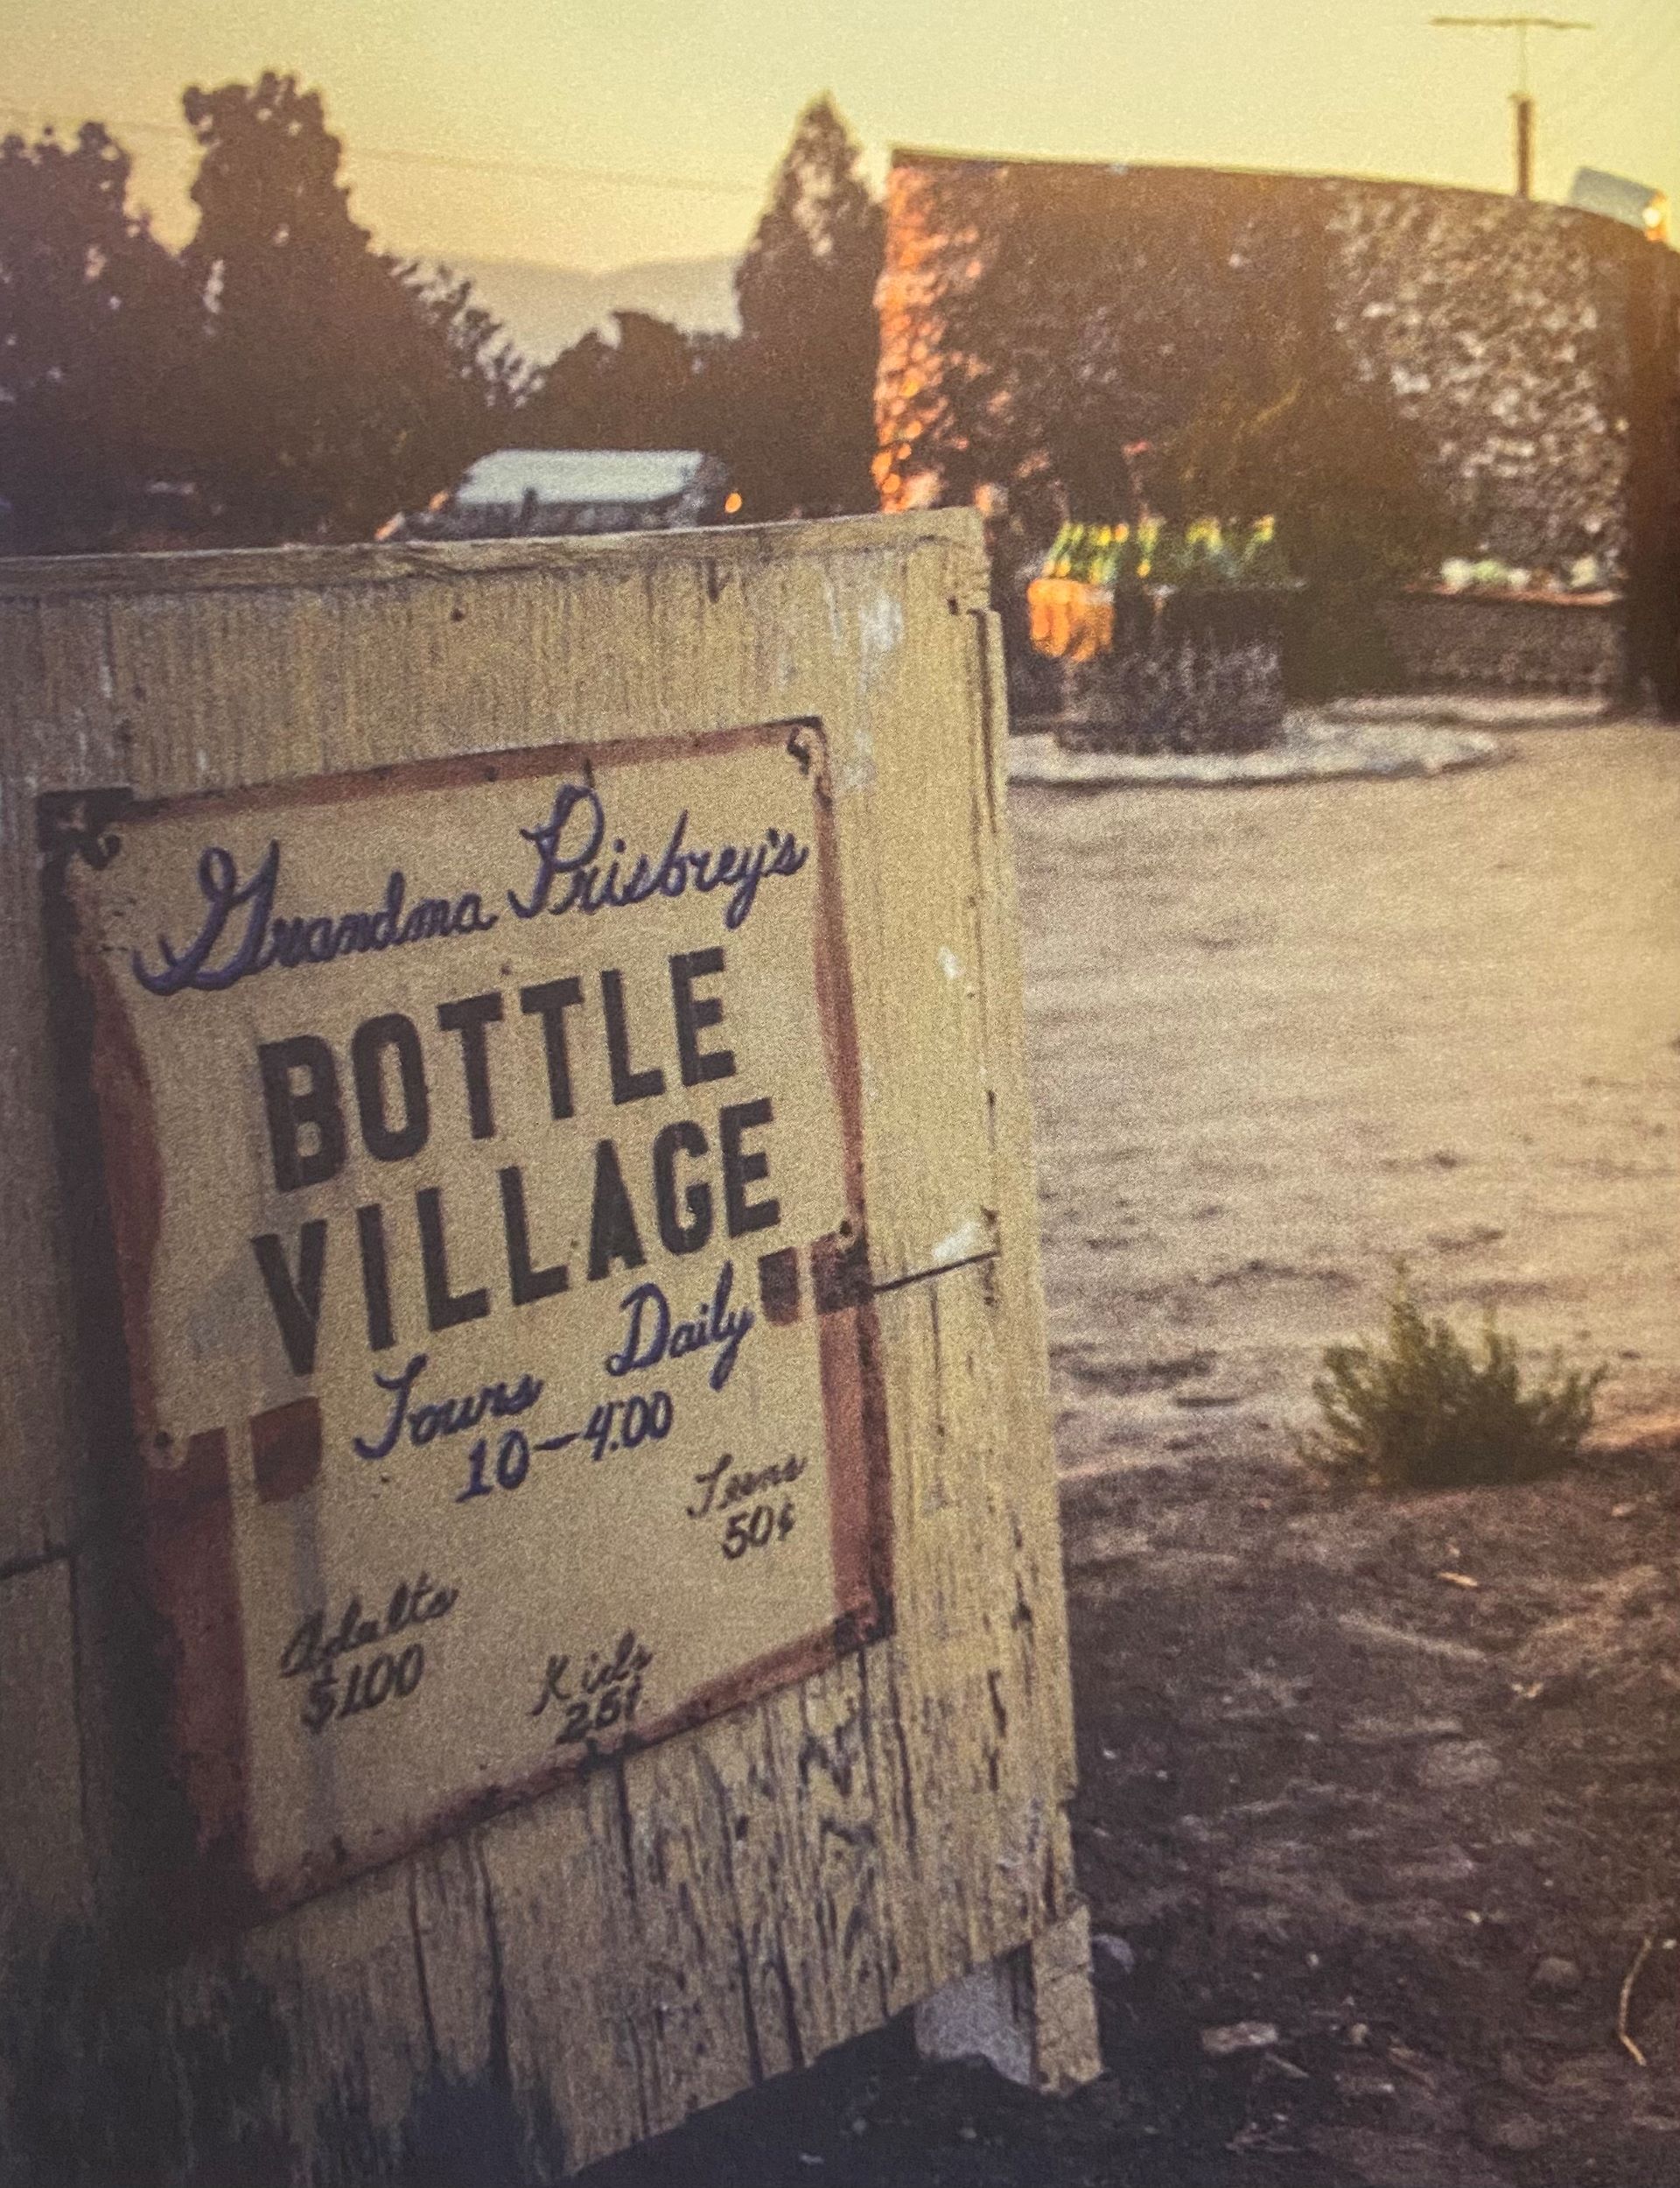 Faded color photograph of a sandwich board-style sign reading "Grandma Prisbrey's / Bottle Village / Tours Daily / 10-4:00," with a view of a structure created from bottles just beyond